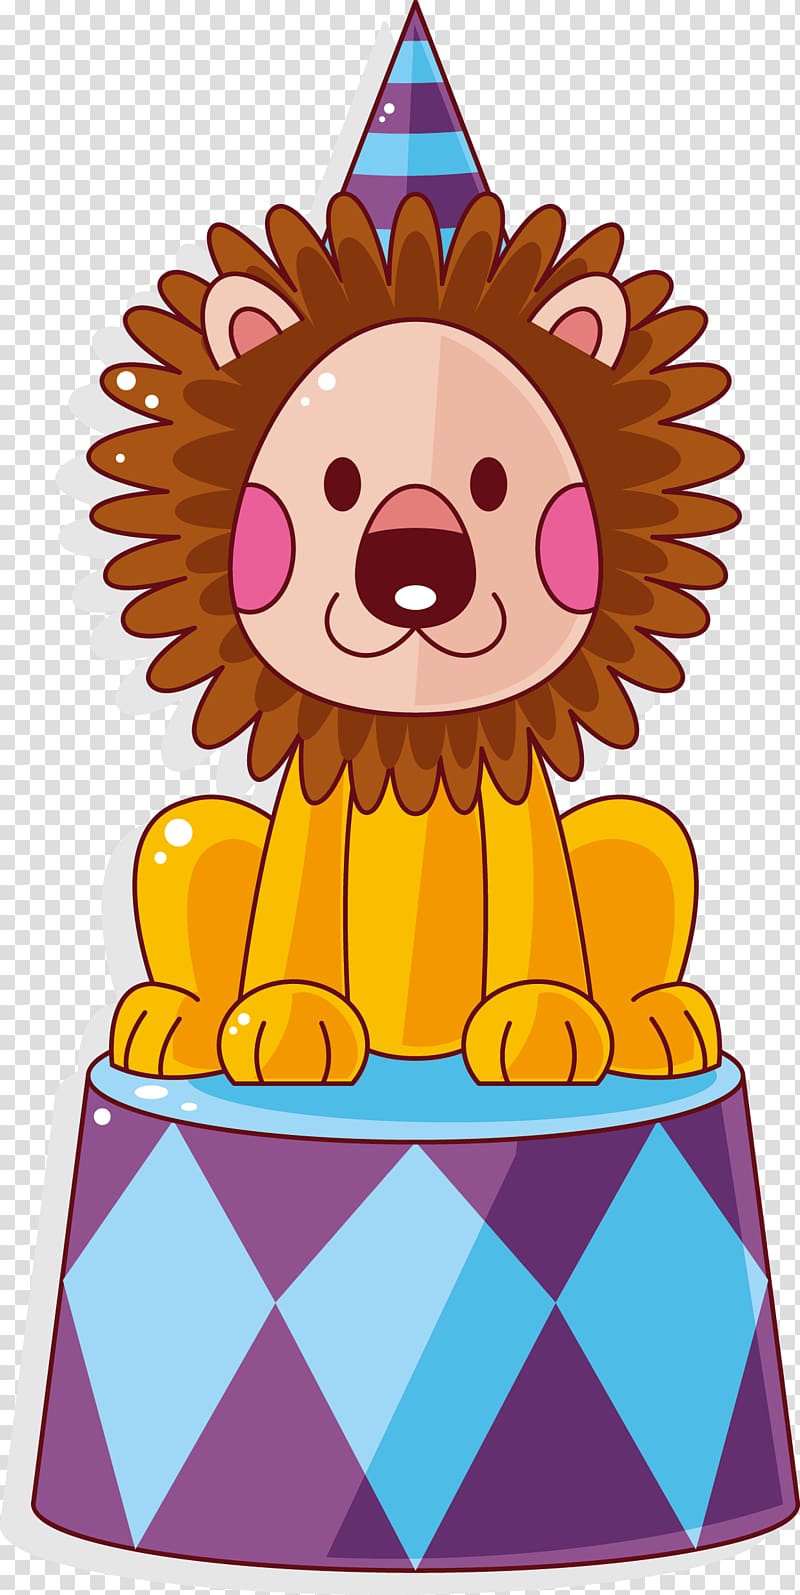 Hair tie Comb Ring Afro-textured hair, Circus lion transparent background PNG clipart